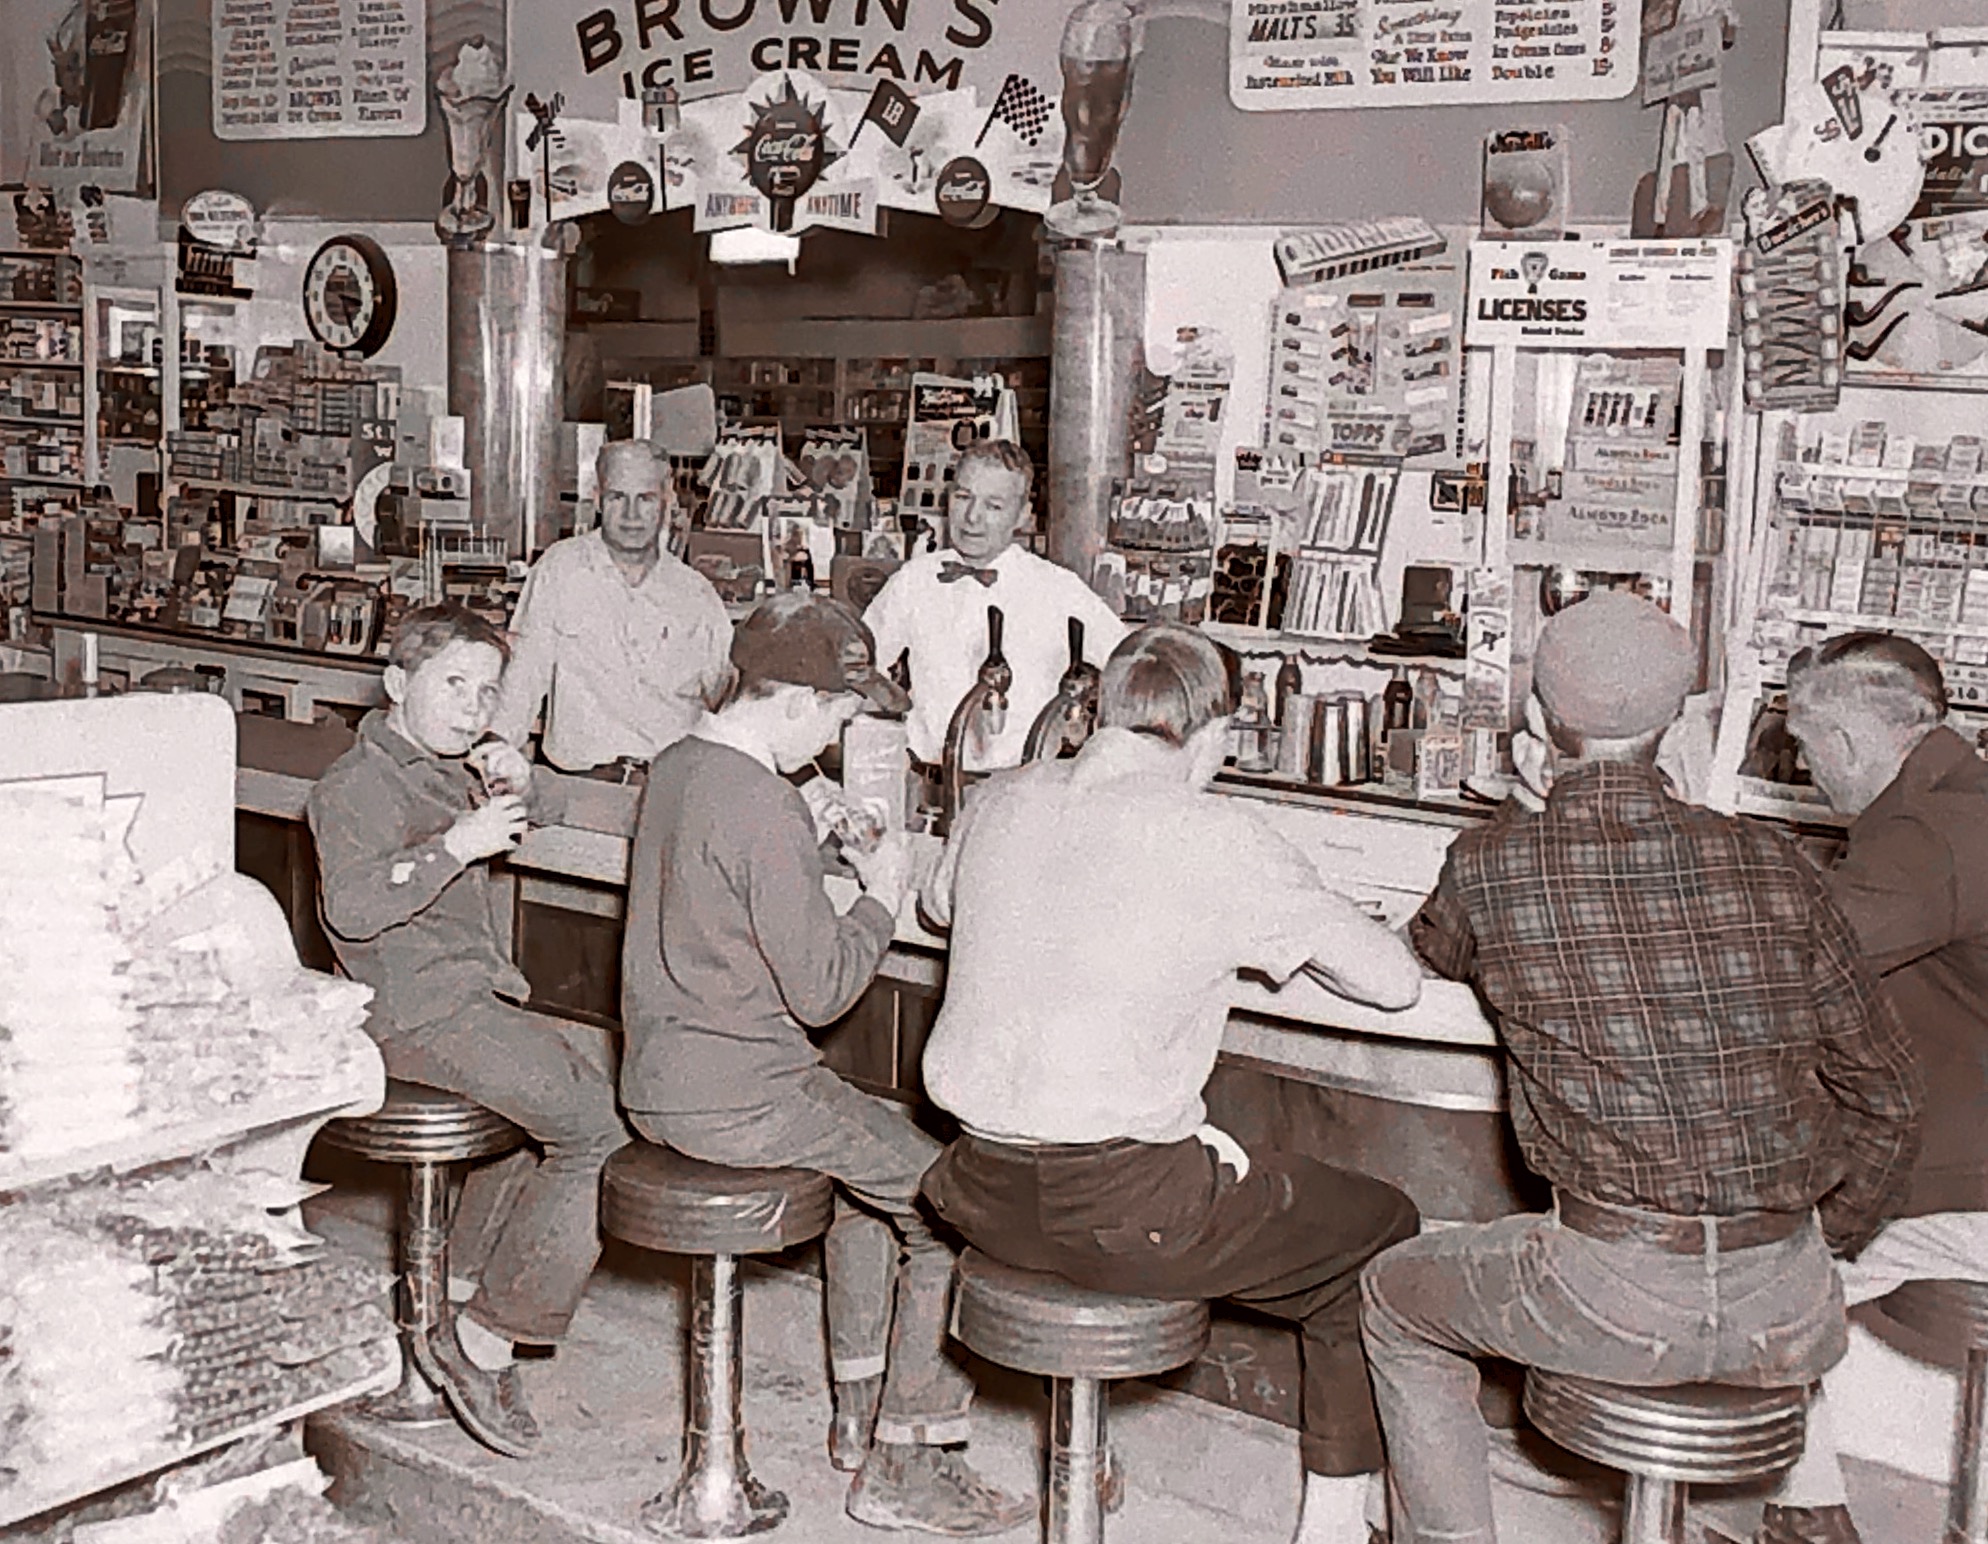 My dad was a photographer and I have a lot of the old negatives. This one shows people at the soda fountain in about 1958, in Arco Idaho. Looks like a good place to have a cold soda or ice cream. I remember one at the drug store when i was growing up, but this one was before I was born. Looks like it ahould have been on an old Norman Rockwell calendar!  I love seeing in these pictures what my dad was seeing through his camera!